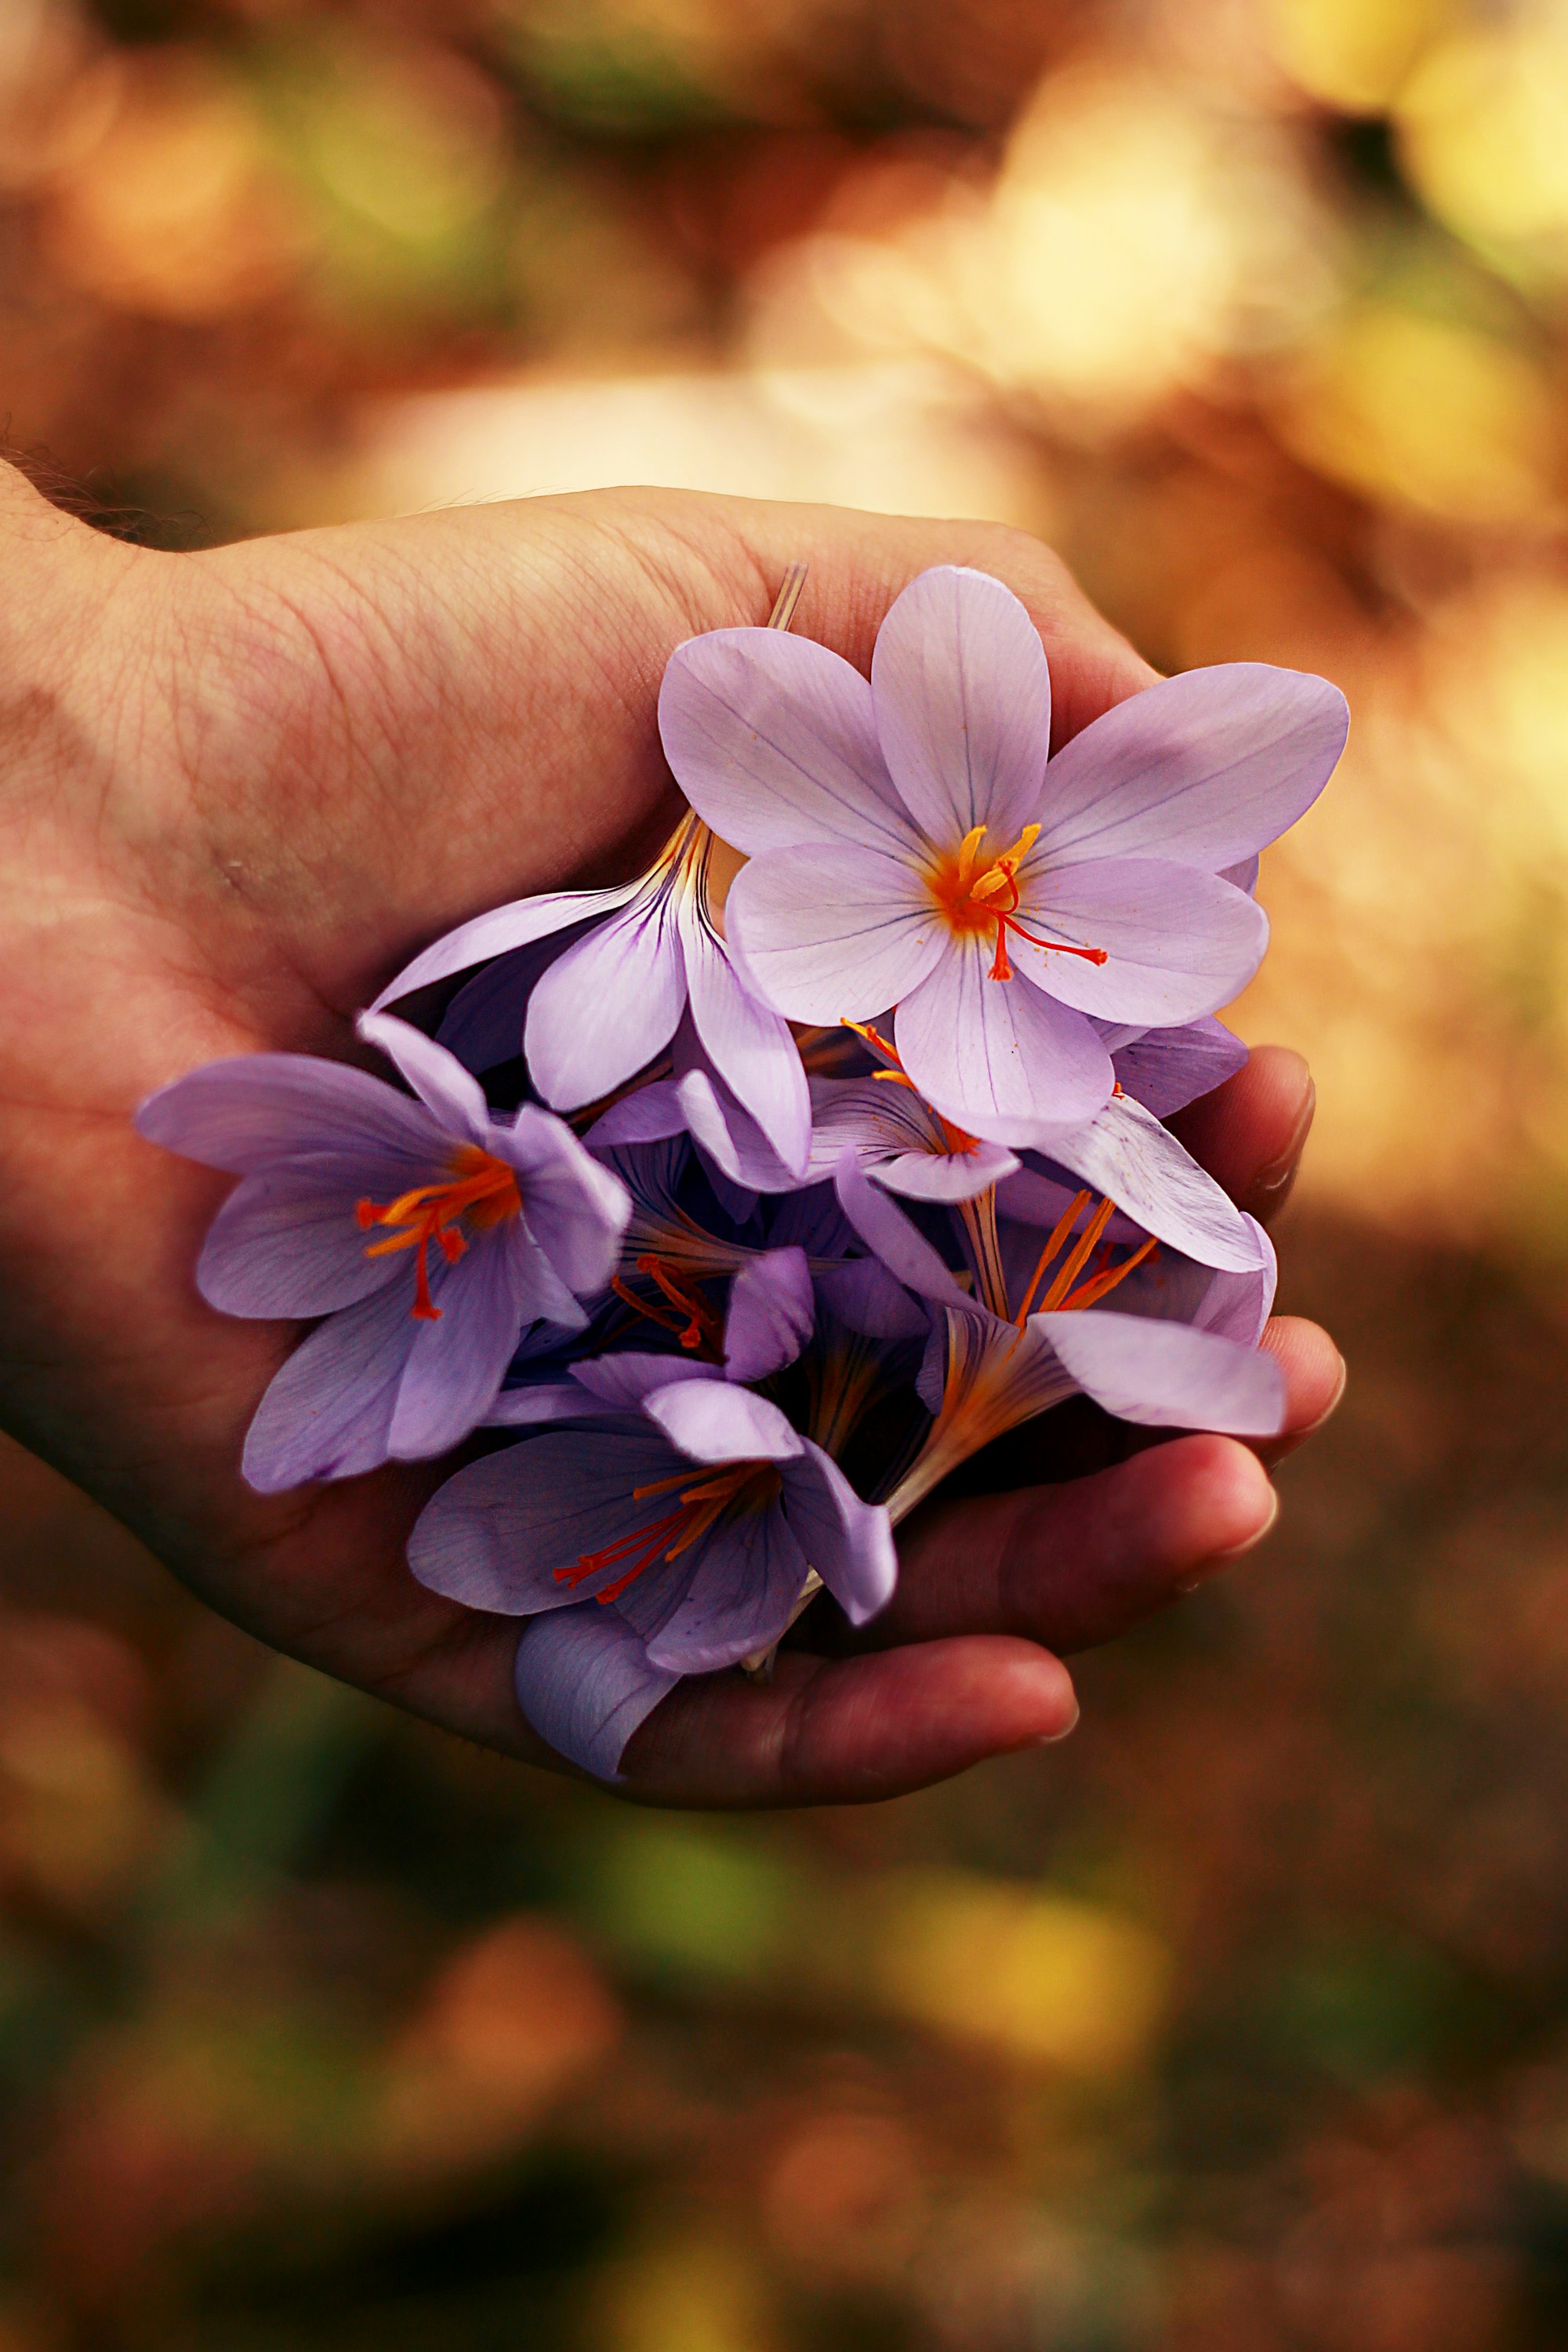 Violet flowers in handHand holding lilac flowers